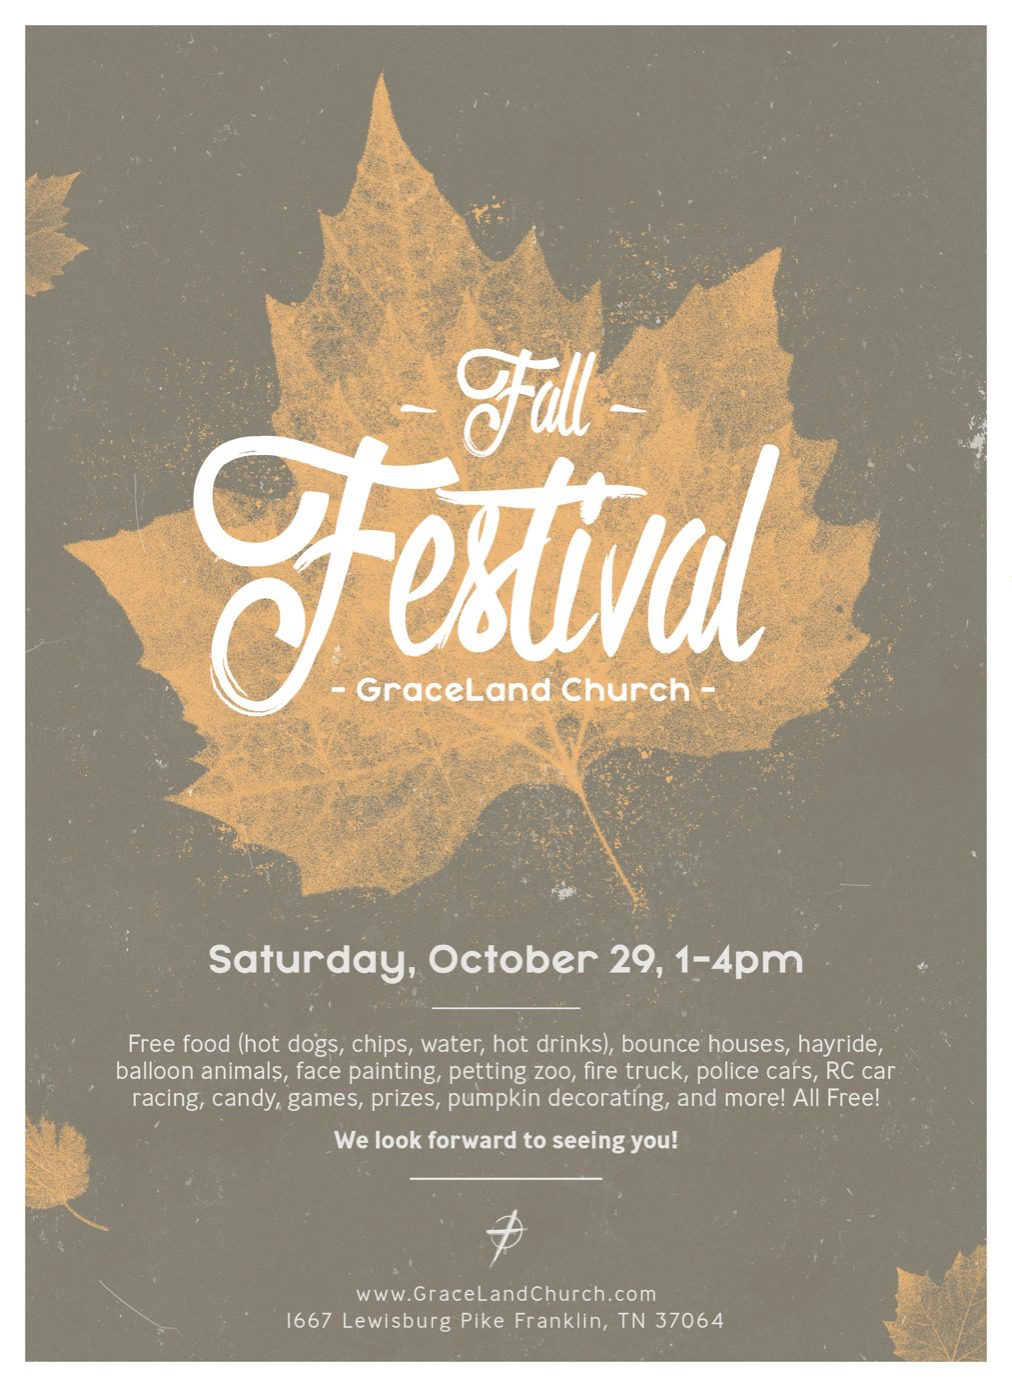 Fall Festival in Franklin, TN, bounce houses, hayride, balloon animals, face painting, petting zoo, fire truck, police cars, RC car racing, candy, games, prizes, pumpkin decorating, and more all free - GraceLand Church Franklin.